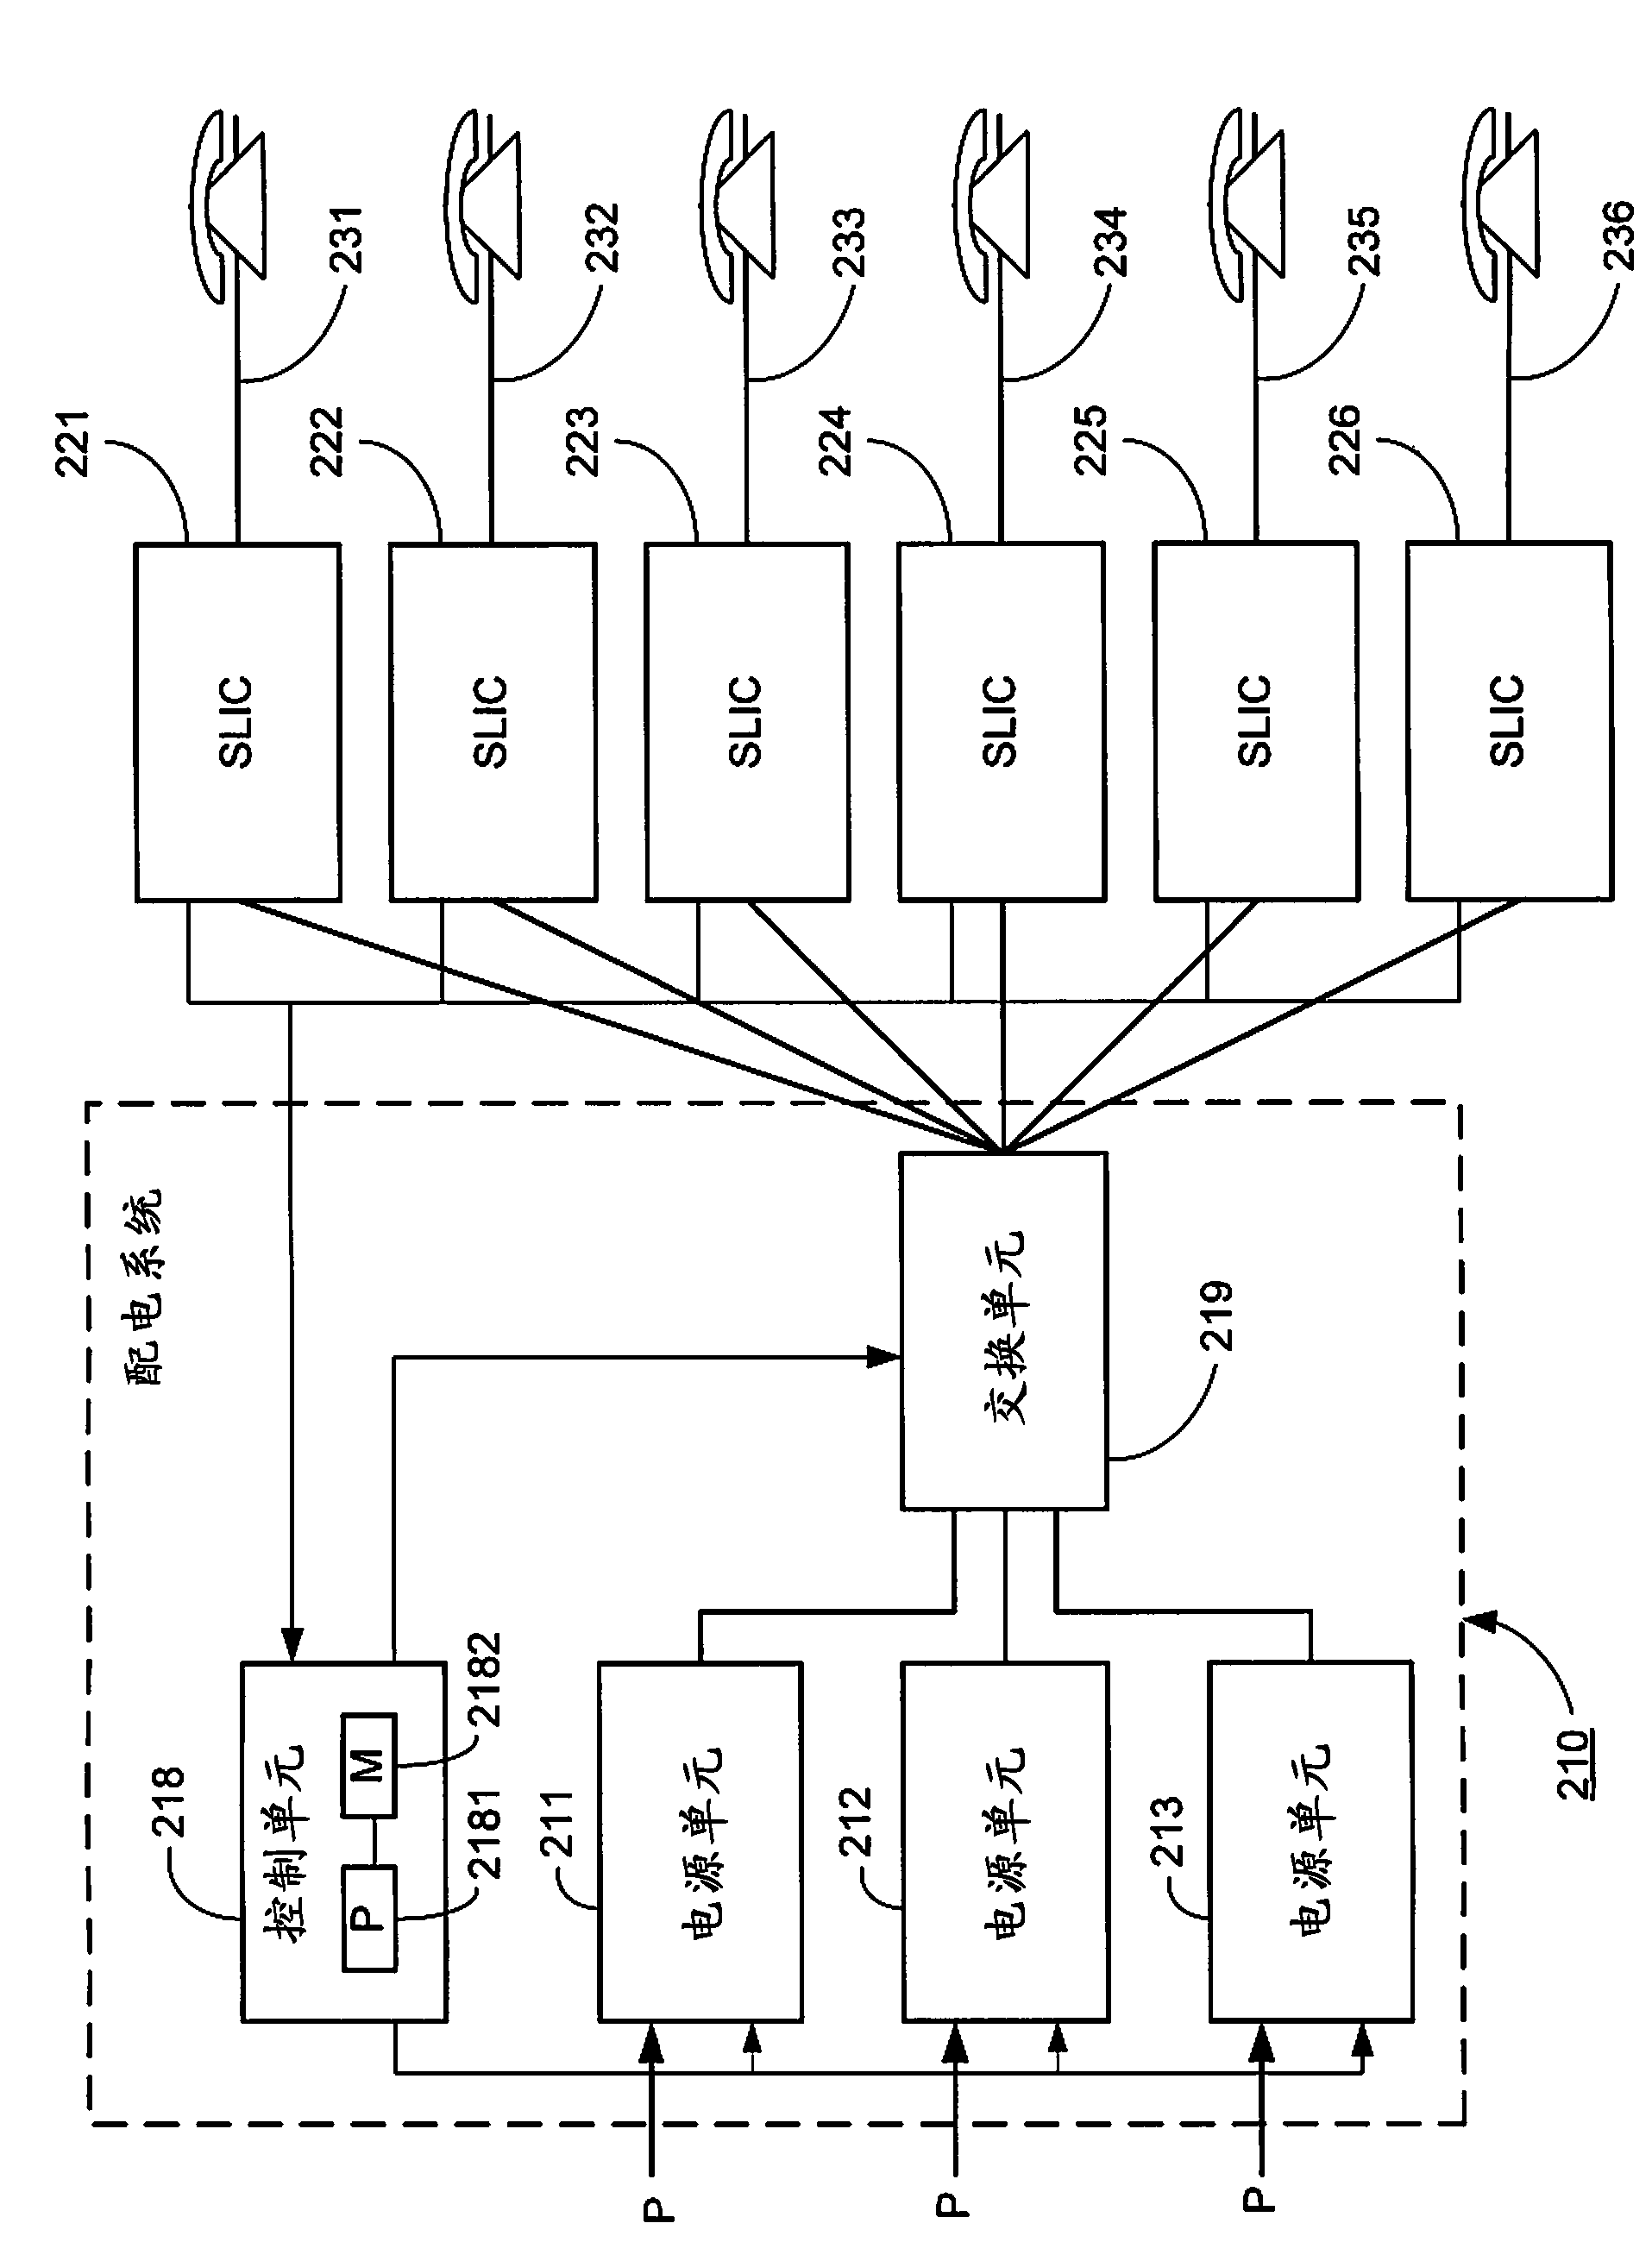 Subscriber line power distribution system